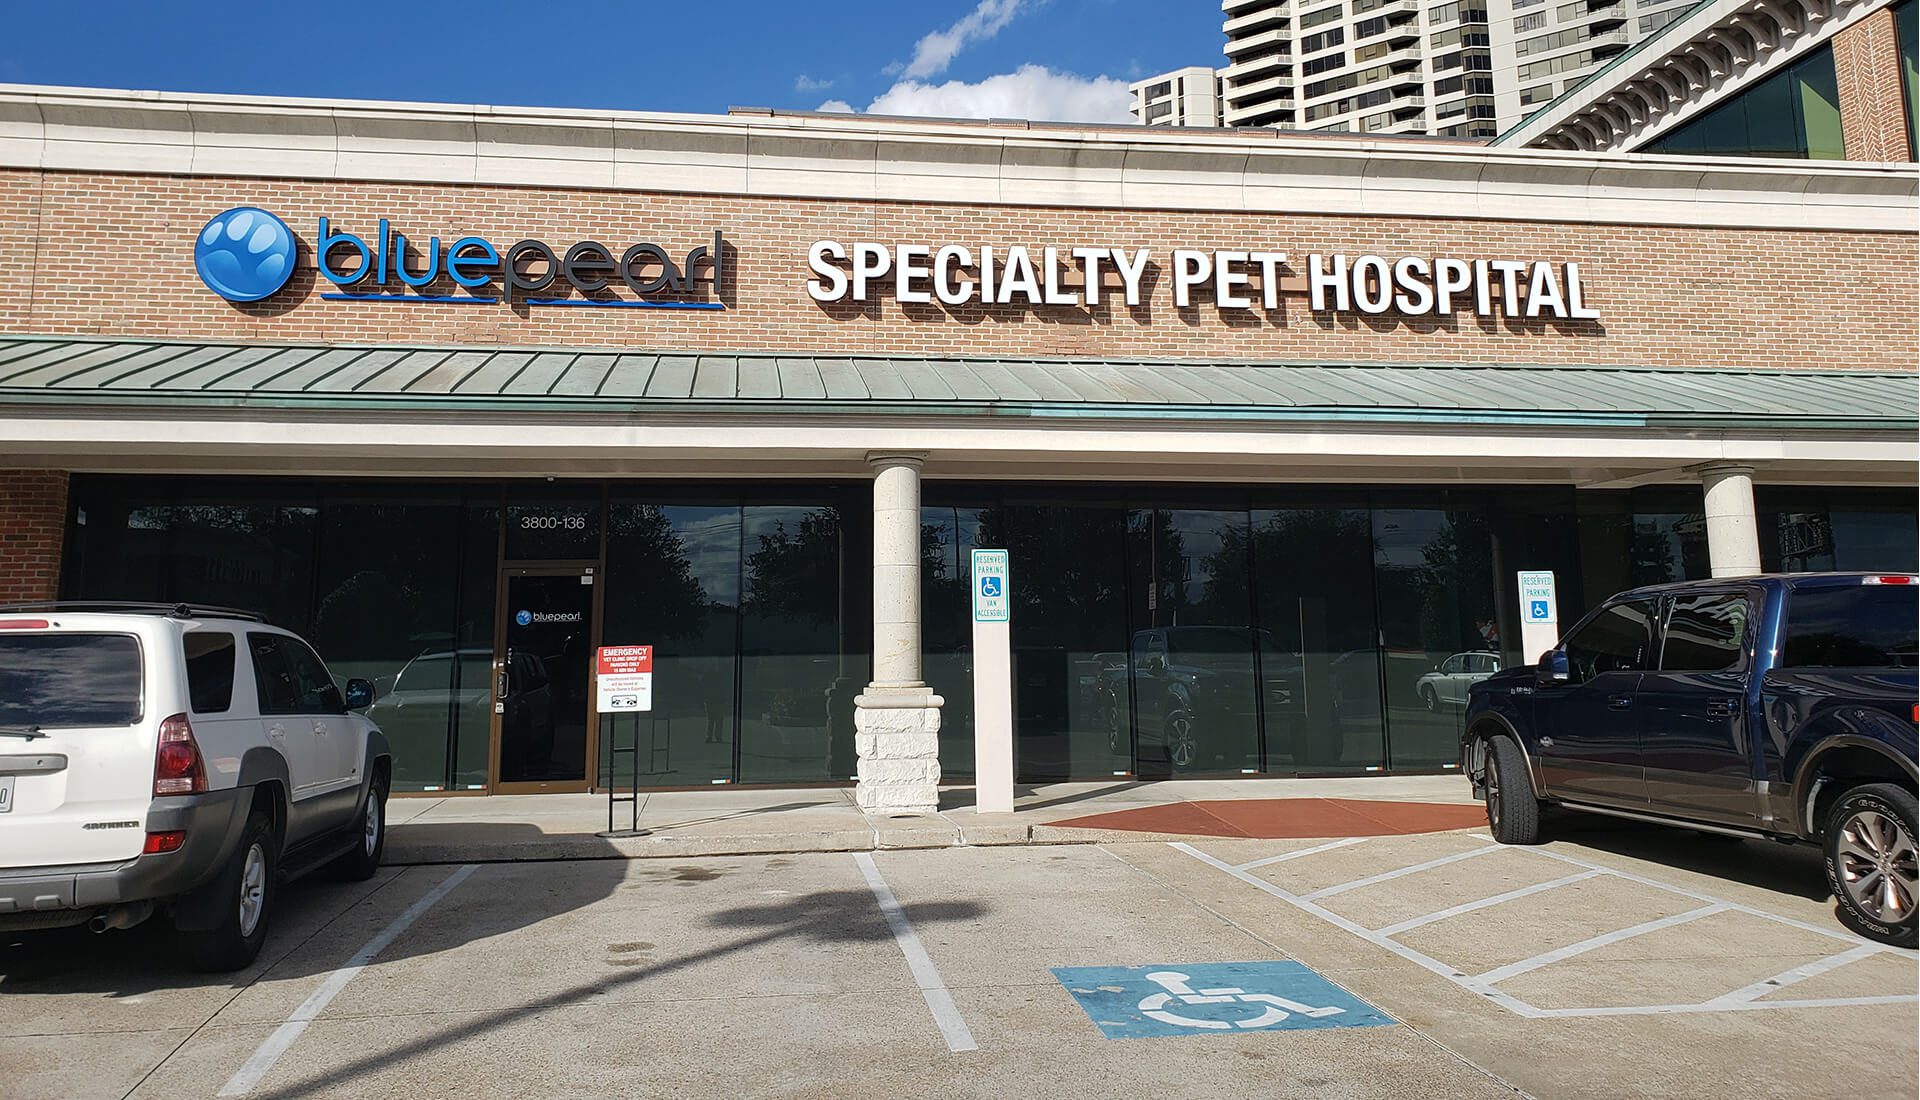 Brick exterior of building says BluePearl specialty Pet Hospital. Parking lot is in front.